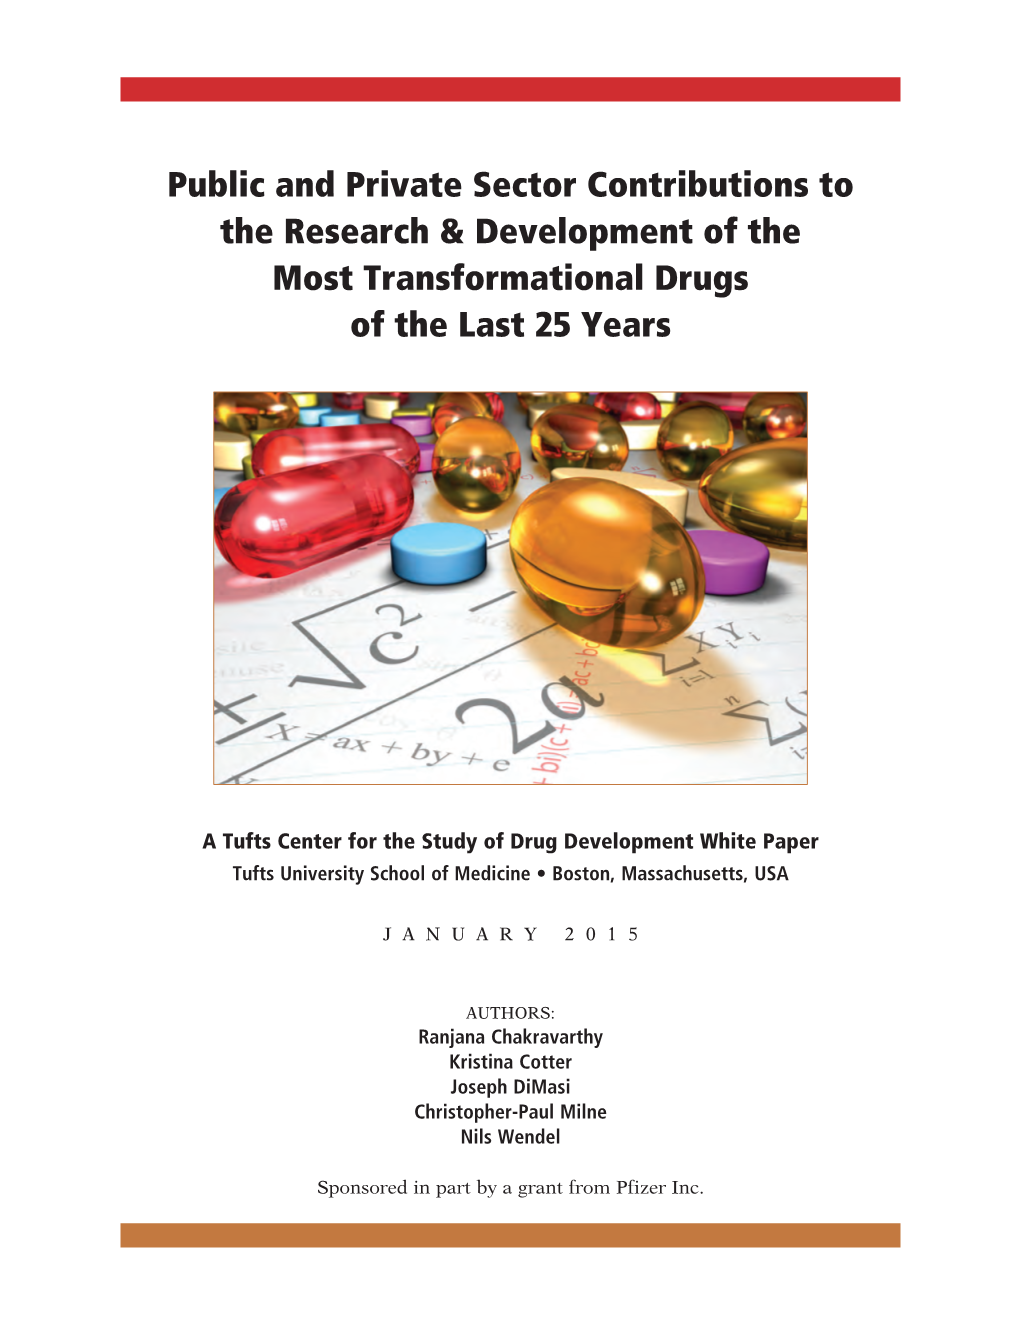 Public and Private Sector Contributions to the Research & Development of the Most Transformational Drugs of the Last 25 Y